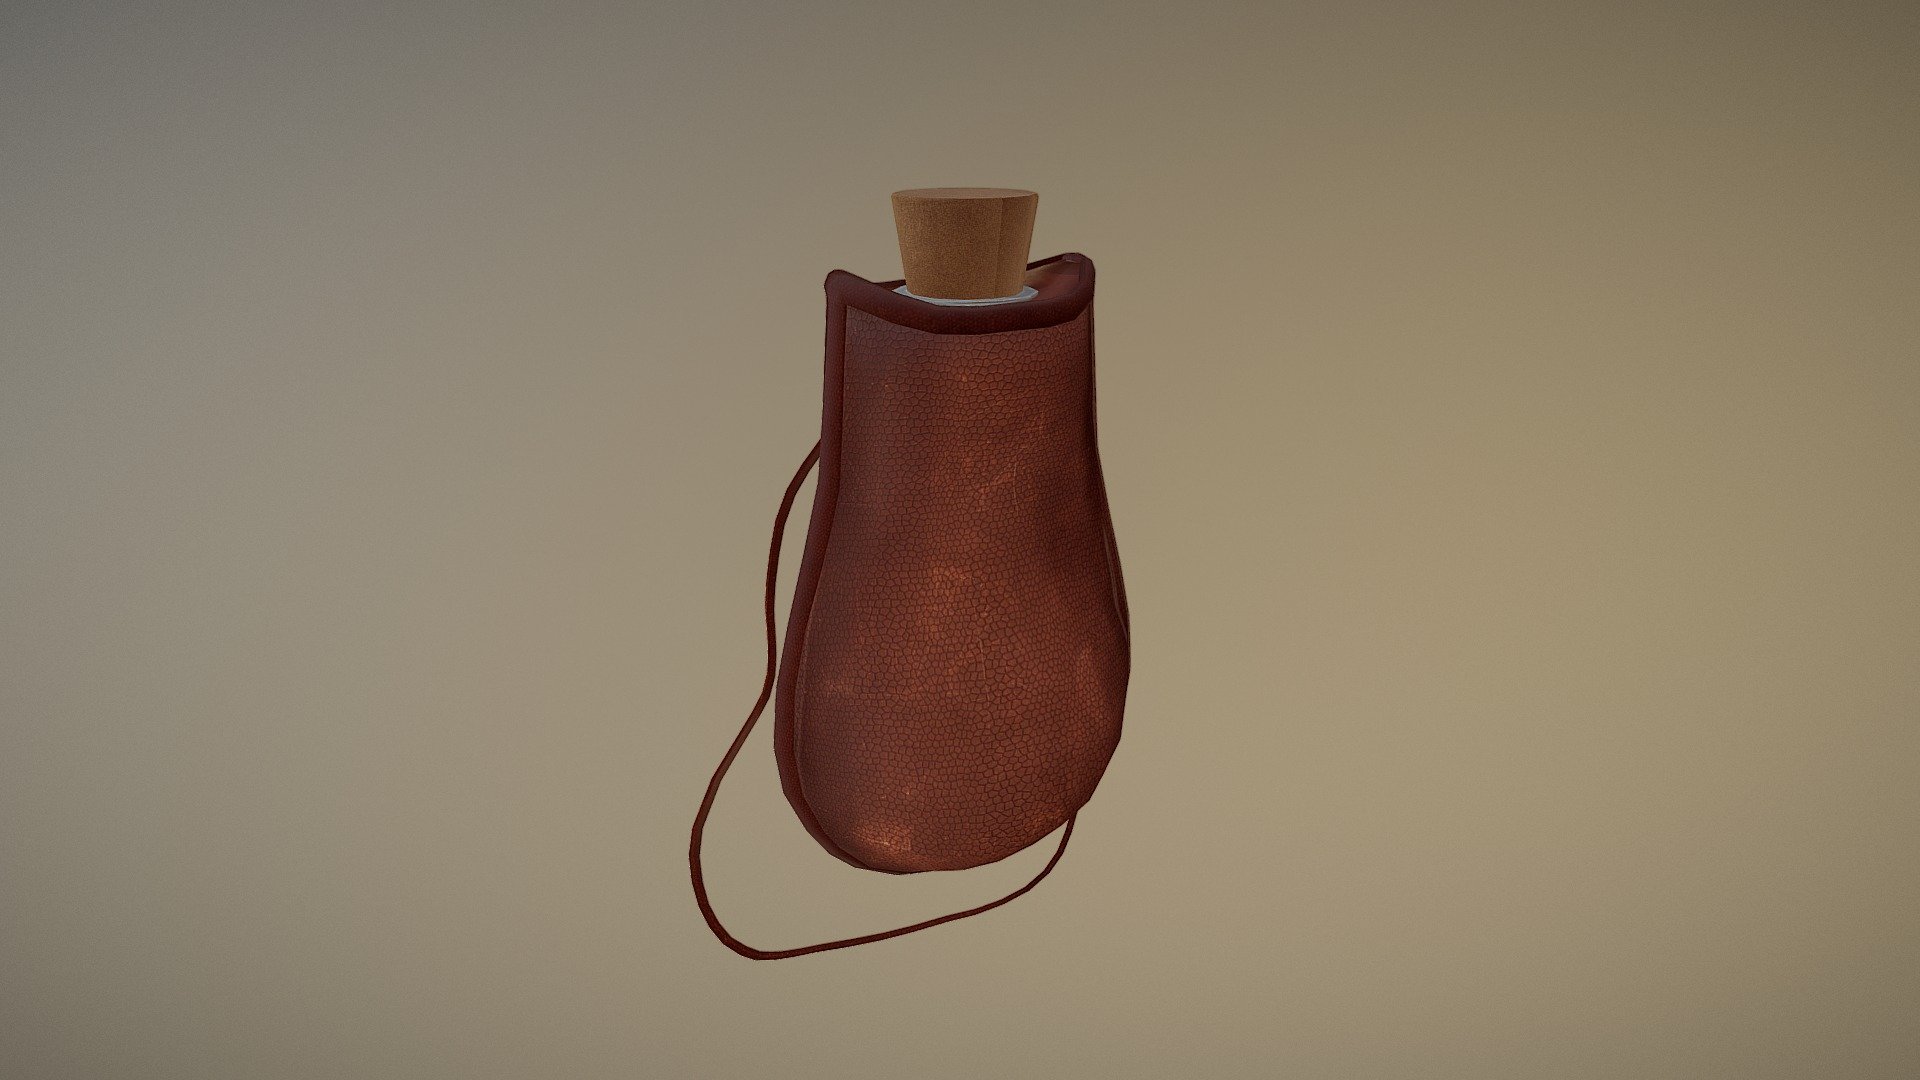 Leather Flask Optimized for UE4, created in 3D Studio Max and textured in Photoshop

Textures 
- Albedo 
- Normal
- Roughness
- AO - Leather Flask - 3D model by Naser (@naser.ali) 3d model